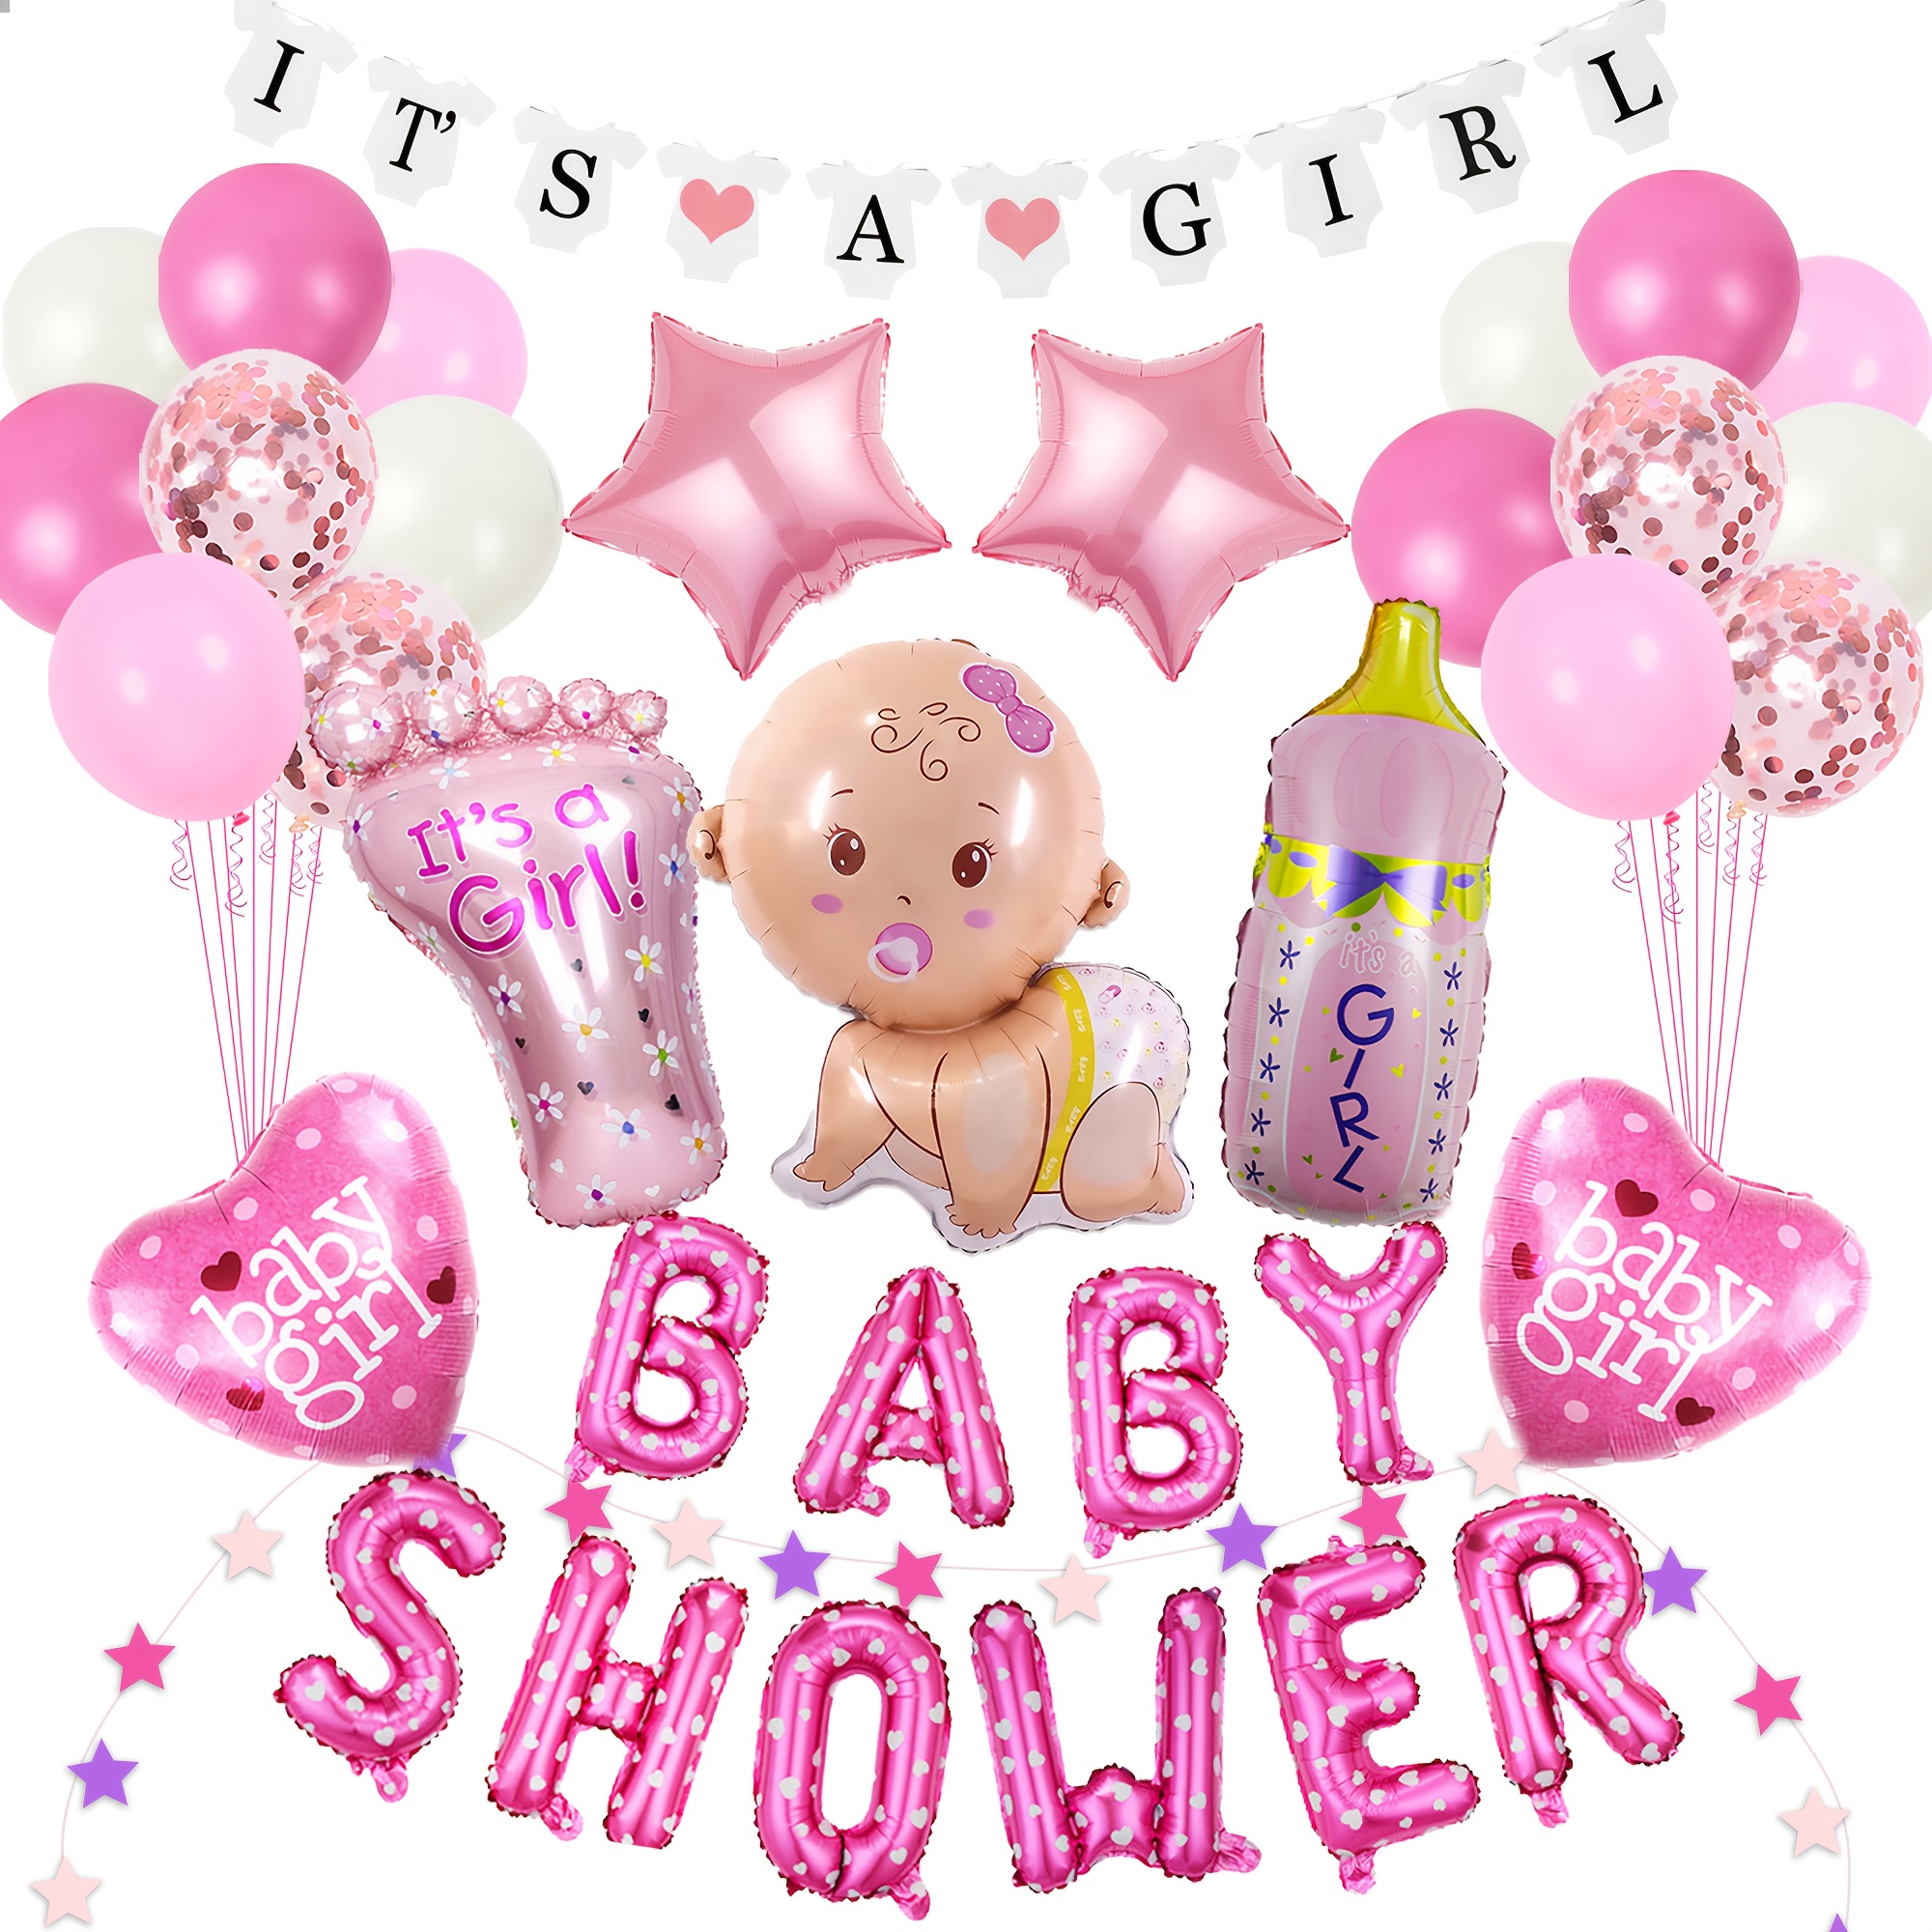 

Set, Baby Shower Decorations For Girls, Birthday Girls - Its A Girl Banners, Balloon Banners, Milk Bottles, Footprints, Stars, Christening And Birthday Decorations